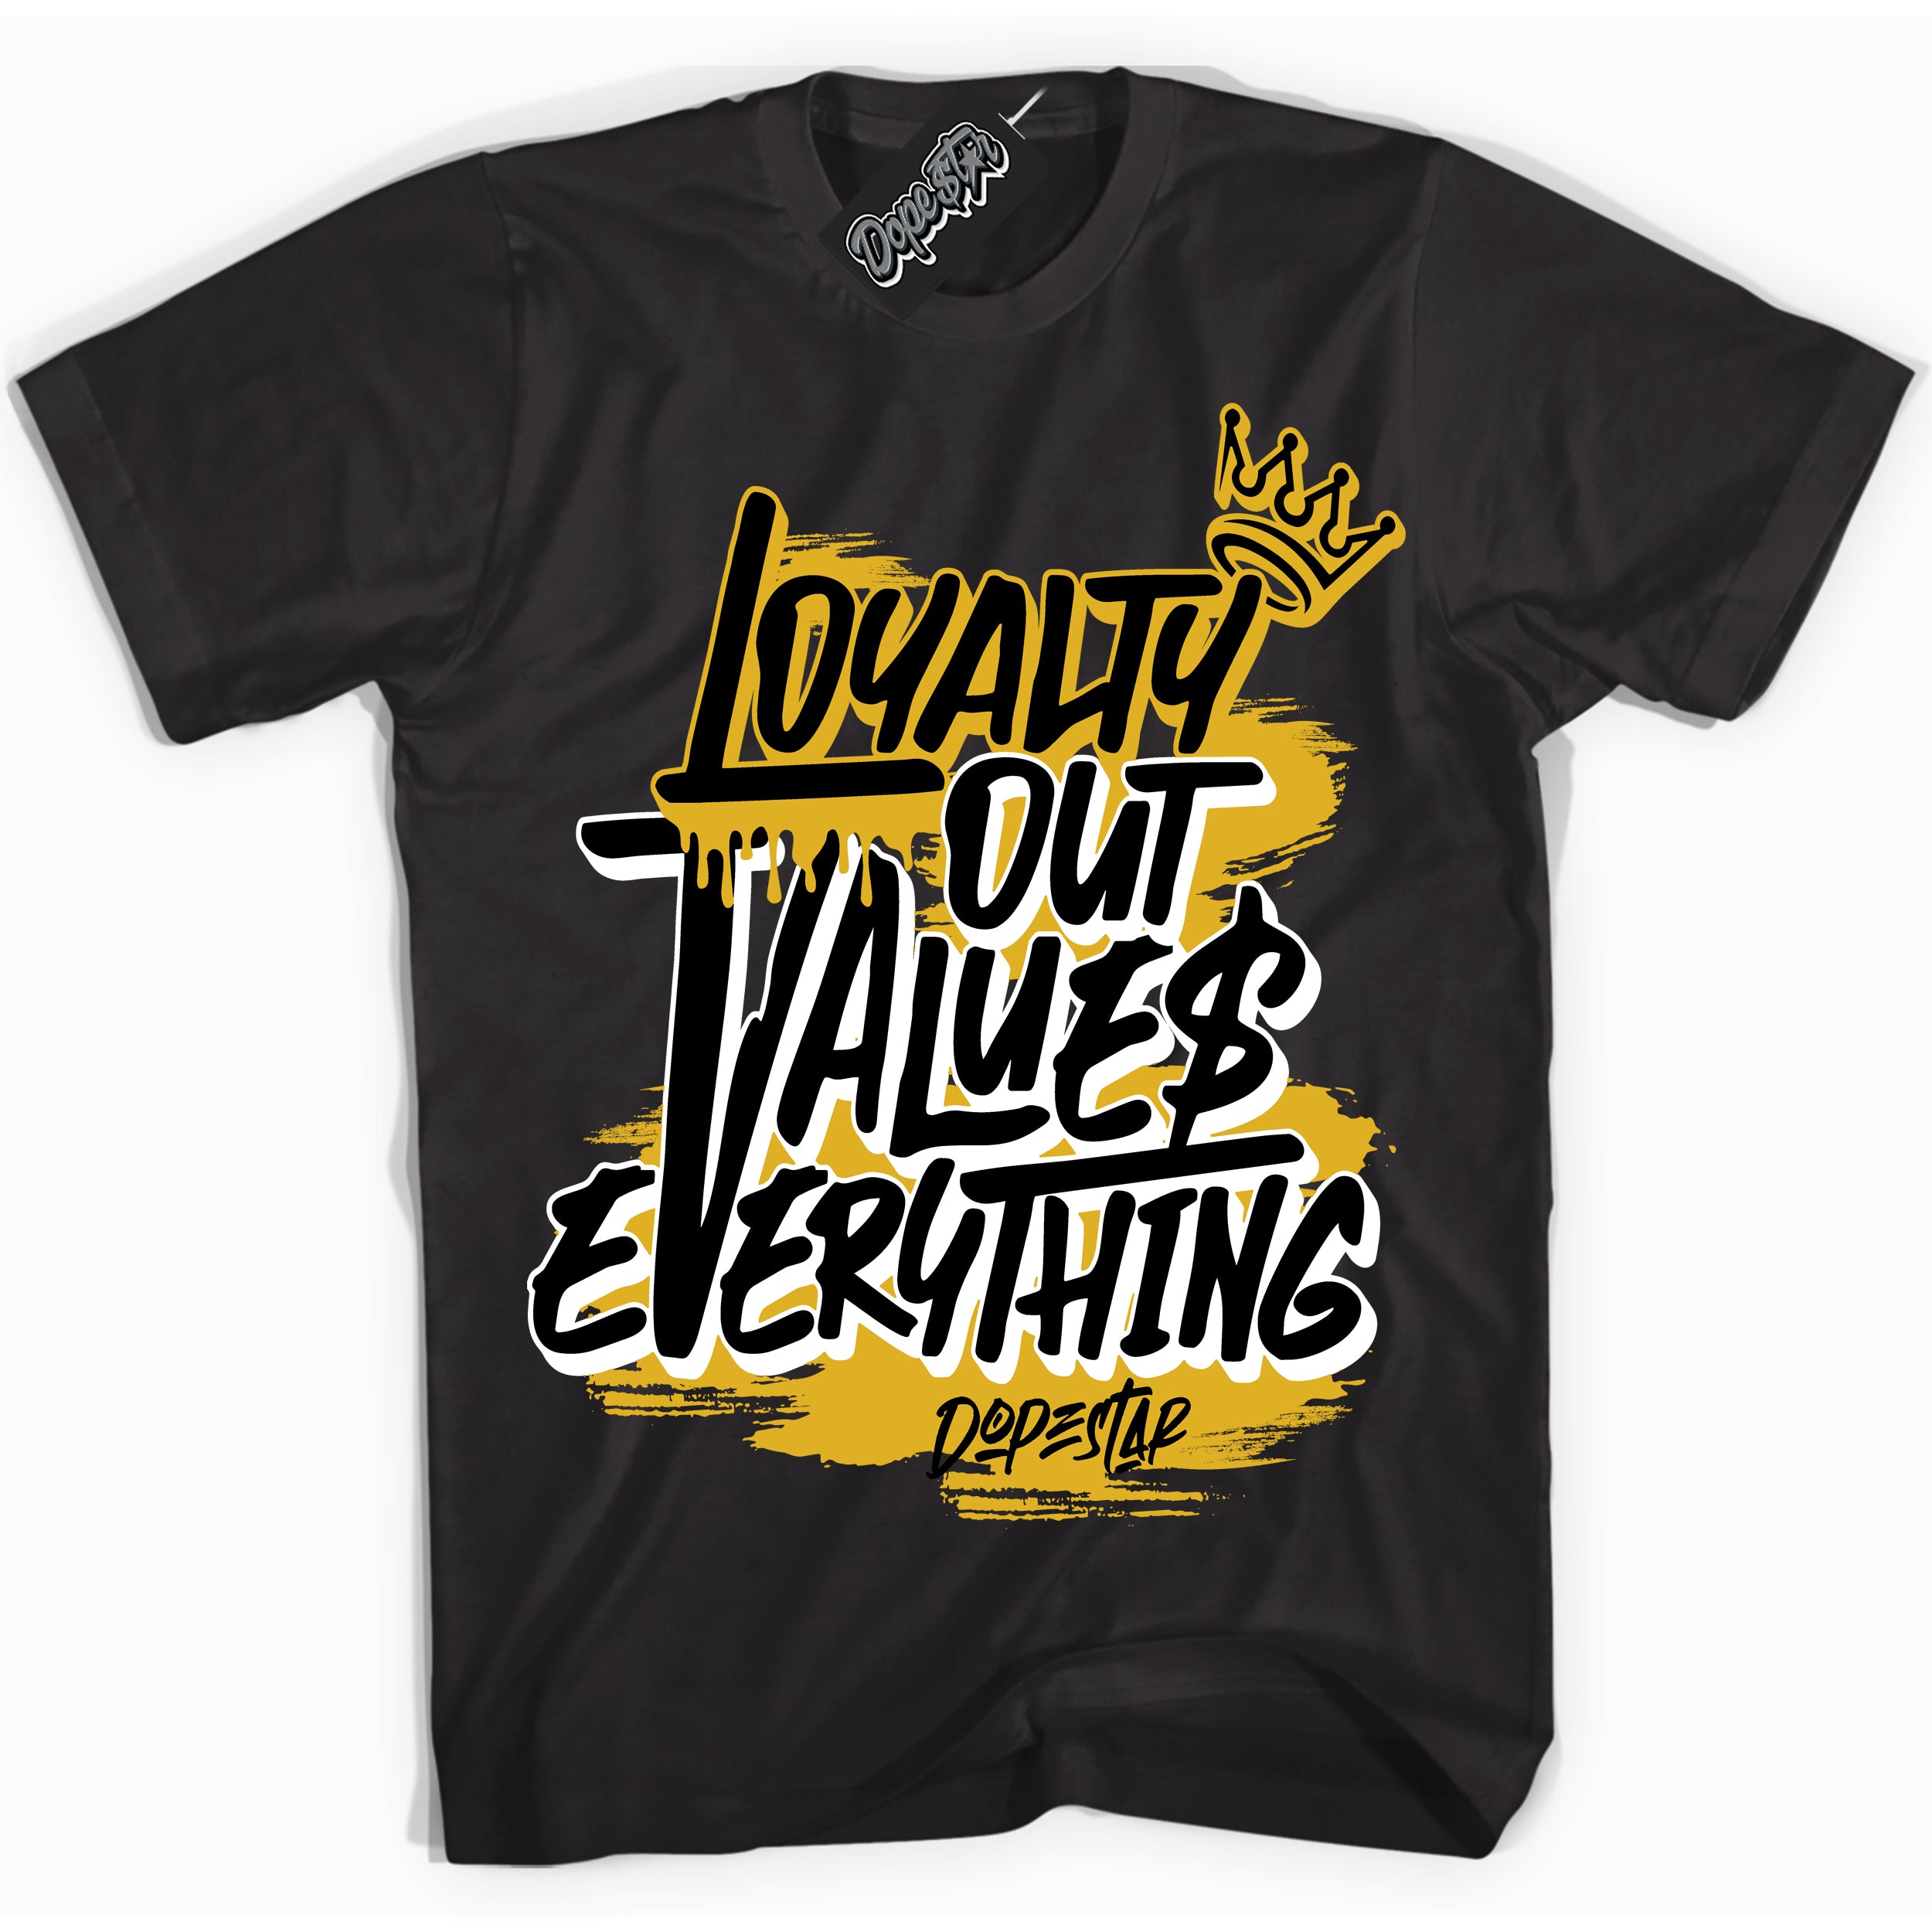 Cool Black Shirt with “ Loyalty Out Values Everything” design that perfectly matches Taxi 1s Sneakers.